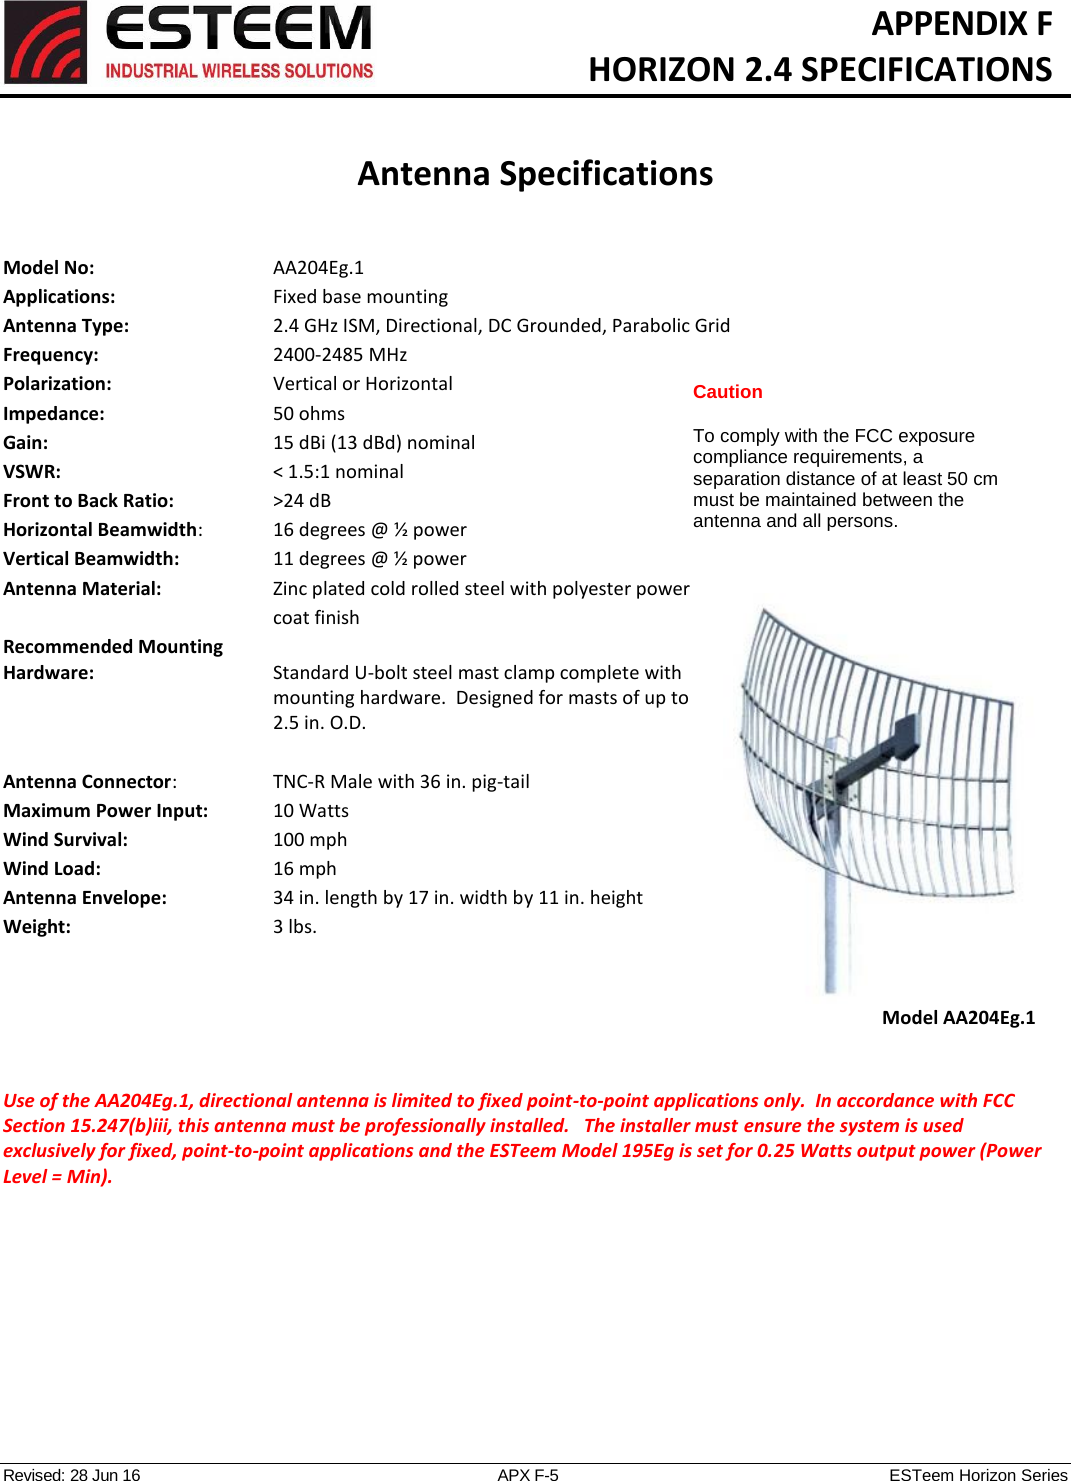   APPENDIX F   HORIZON 2.4 SPECIFICATIONS   Antenna Specifications   Revised: 28 Jun 16  APX F-5  ESTeem Horizon Series Model No:        AA204Eg.1 Applications:       Fixed base mounting  Antenna Type:  2.4 GHz ISM, Directional, DC Grounded, Parabolic Grid Frequency:        2400-2485 MHz Polarization:      Vertical or Horizontal Impedance:        50 ohms Gain:          15 dBi (13 dBd) nominal VSWR:           &lt; 1.5:1 nominal  Front to Back Ratio:      &gt;24 dB Horizontal Beamwidth:    16 degrees @ ½ power Vertical Beamwidth:      11 degrees @ ½ power Antenna Material:    Zinc plated cold rolled steel with polyester power coat finish Recommended Mounting  Hardware:  Standard U-bolt steel mast clamp complete with mounting hardware.  Designed for masts of up to 2.5 in. O.D.  Antenna Connector:     TNC-R Male with 36 in. pig-tail Maximum Power Input:      10 Watts Wind Survival:        100 mph Wind Load:          16 mph Antenna Envelope:      34 in. length by 17 in. width by 11 in. height Weight:             3 lbs.      Use of the AA204Eg.1, directional antenna is limited to fixed point-to-point applications only.  In accordance with FCC Section 15.247(b)iii, this antenna must be professionally installed.   The installer must ensure the system is used exclusively for fixed, point-to-point applications and the ESTeem Model 195Eg is set for 0.25 Watts output power (Power Level = Min).    Model AA204Eg.1 Caution  To comply with the FCC exposure compliance requirements, a separation distance of at least 50 cm must be maintained between the antenna and all persons. 